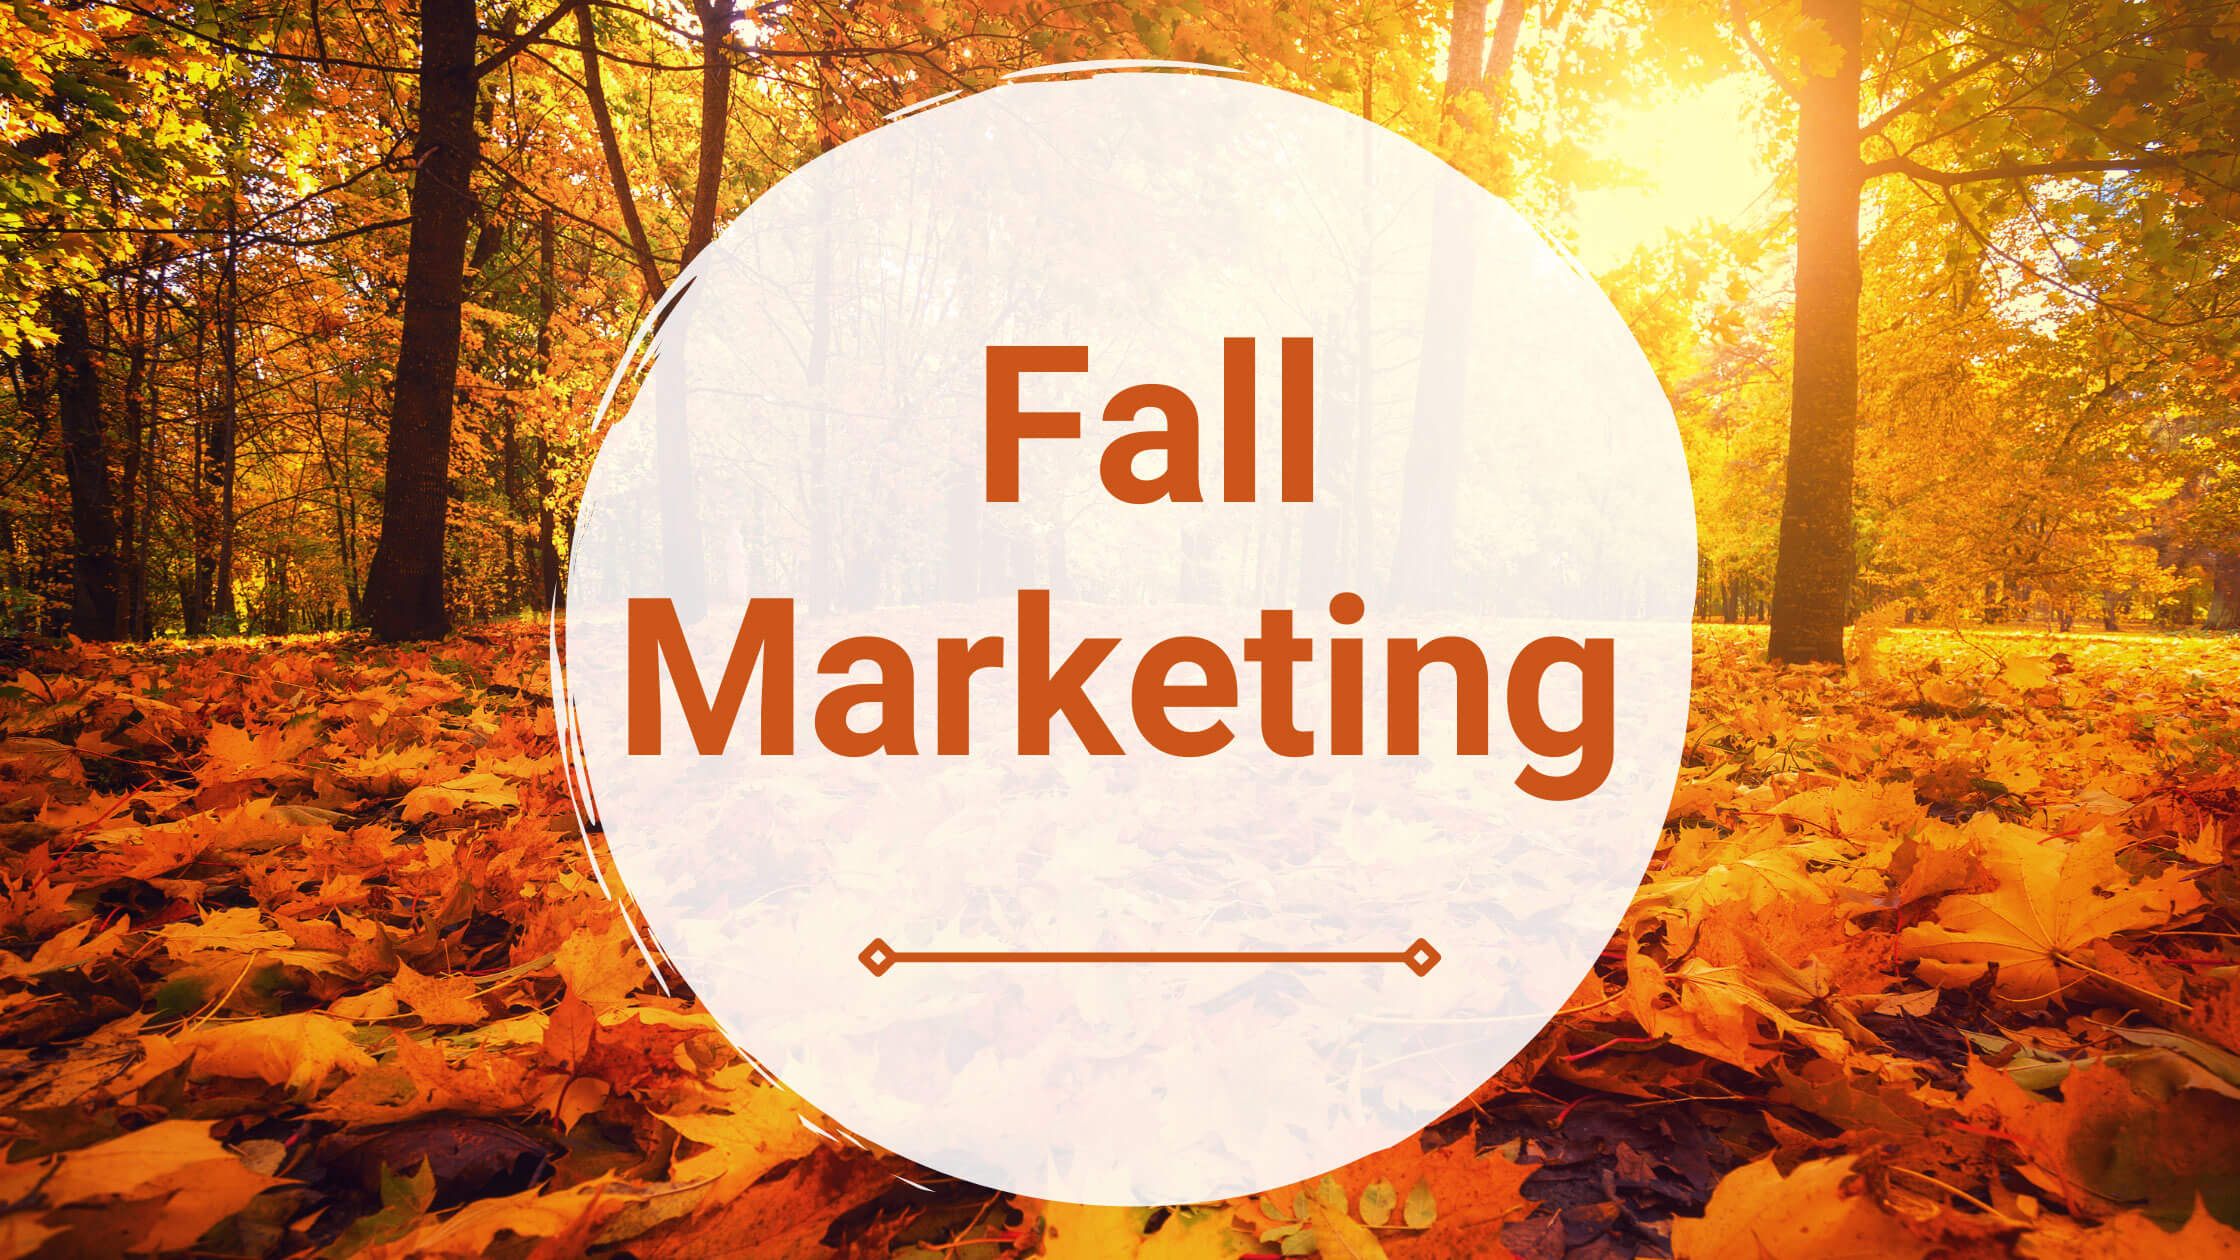 Top 7 Fall Marketing Ideas for 2022